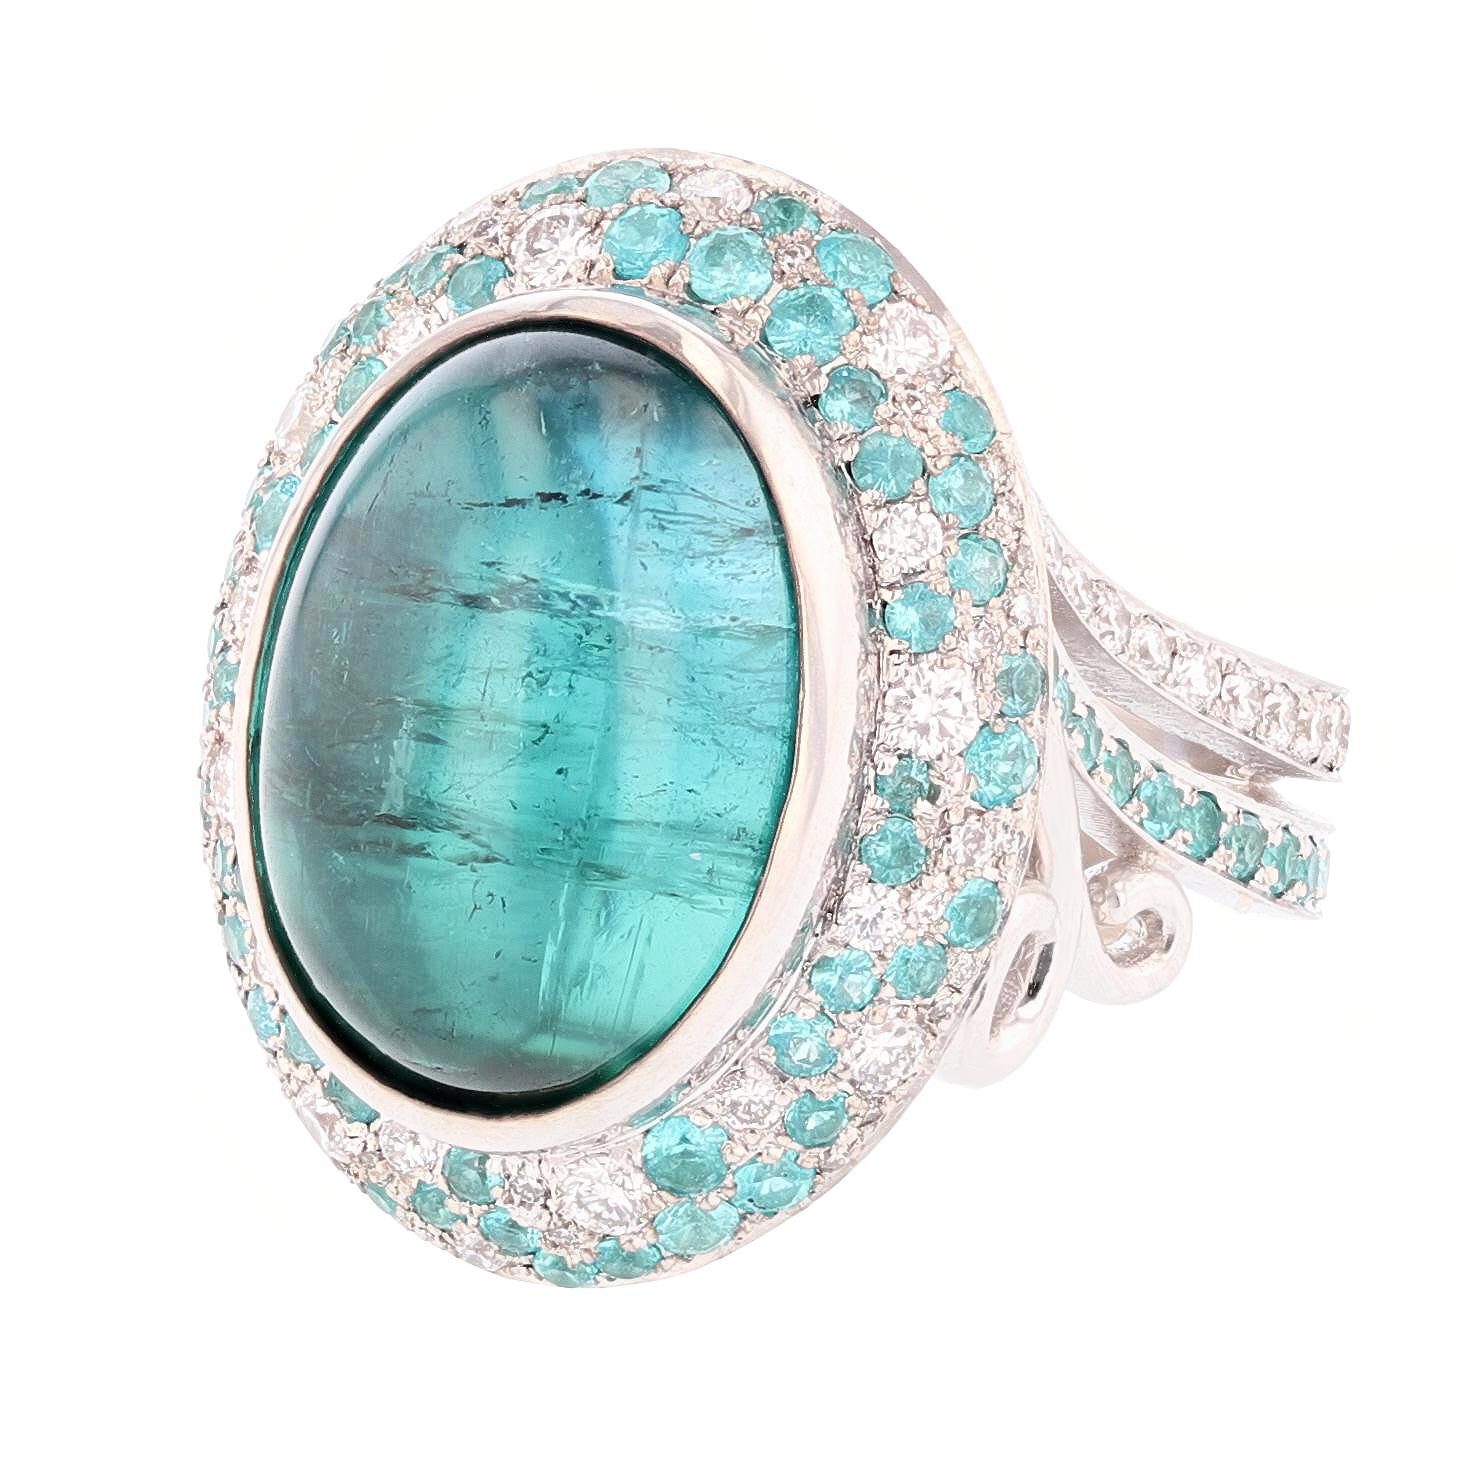 This ring is designed by Nazarelle and made in 14k white gold. For the center stone it features one cabochon oval blue tourmaline weighing 11.50ct and bezel set. The mounting features 87 pave set round shape paraiba tourmalines weighing 1.20ct and